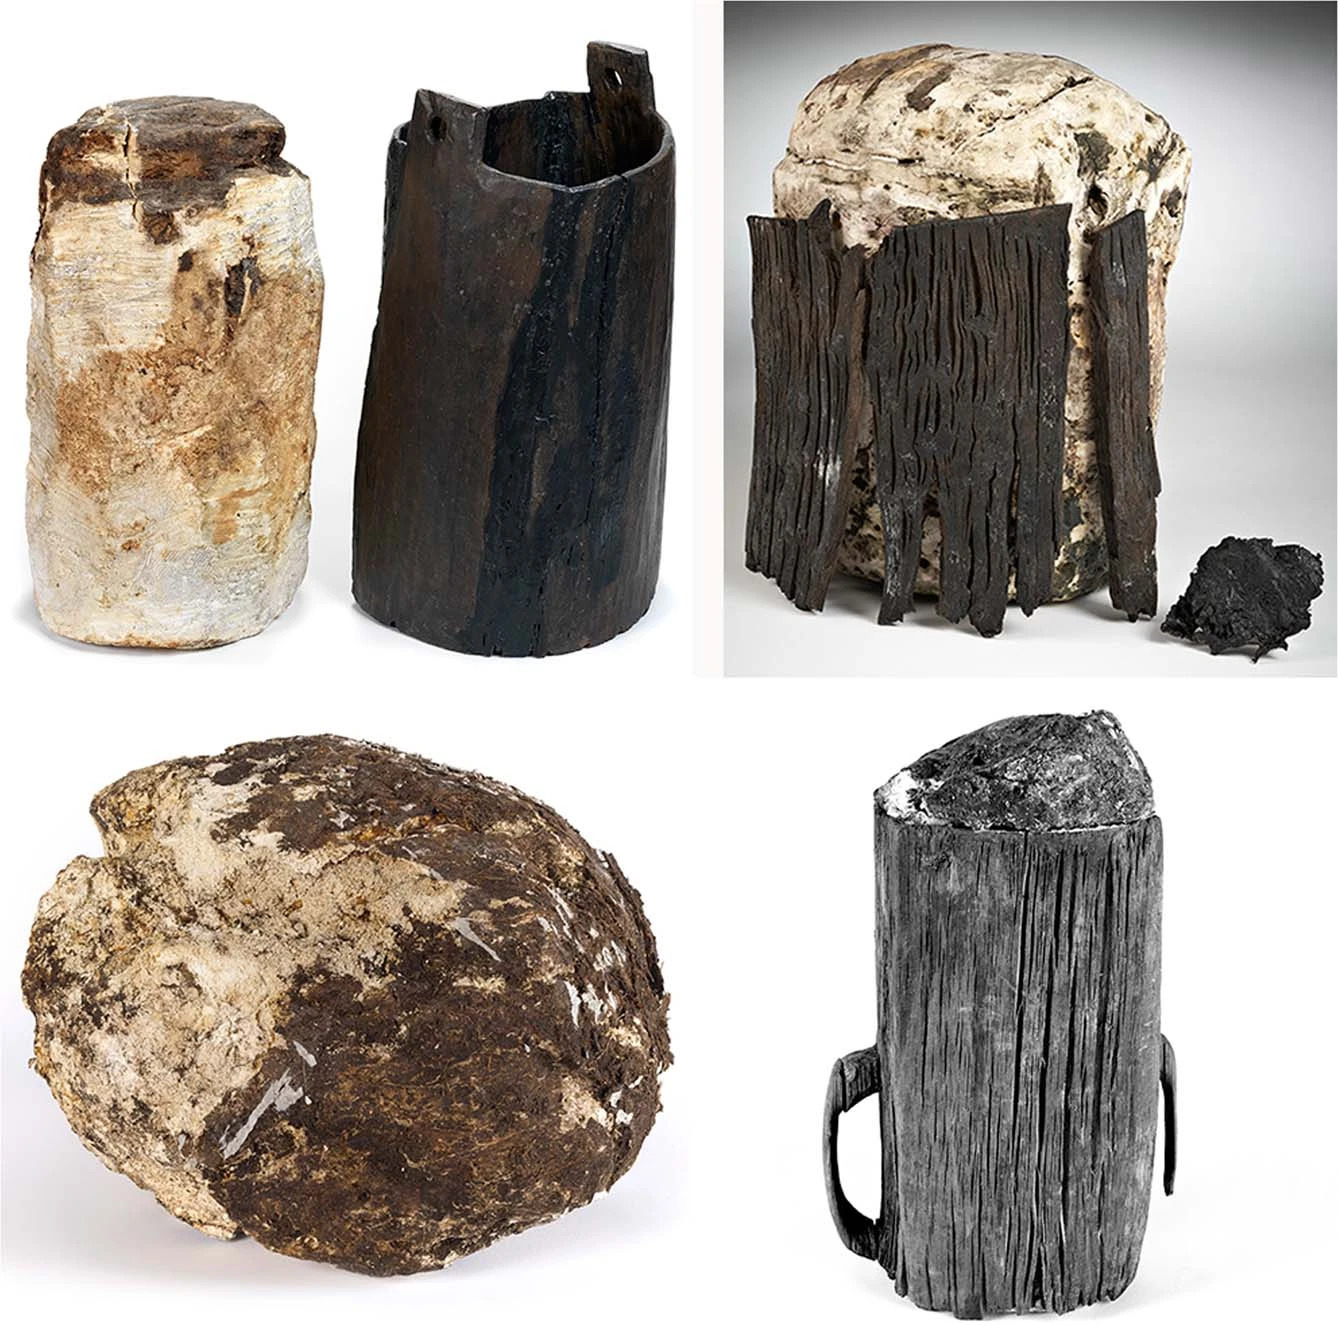 Four images of bog butter - white hunks covered with varying levels of mossy flora, encased in wooden bucket-like contraptions.